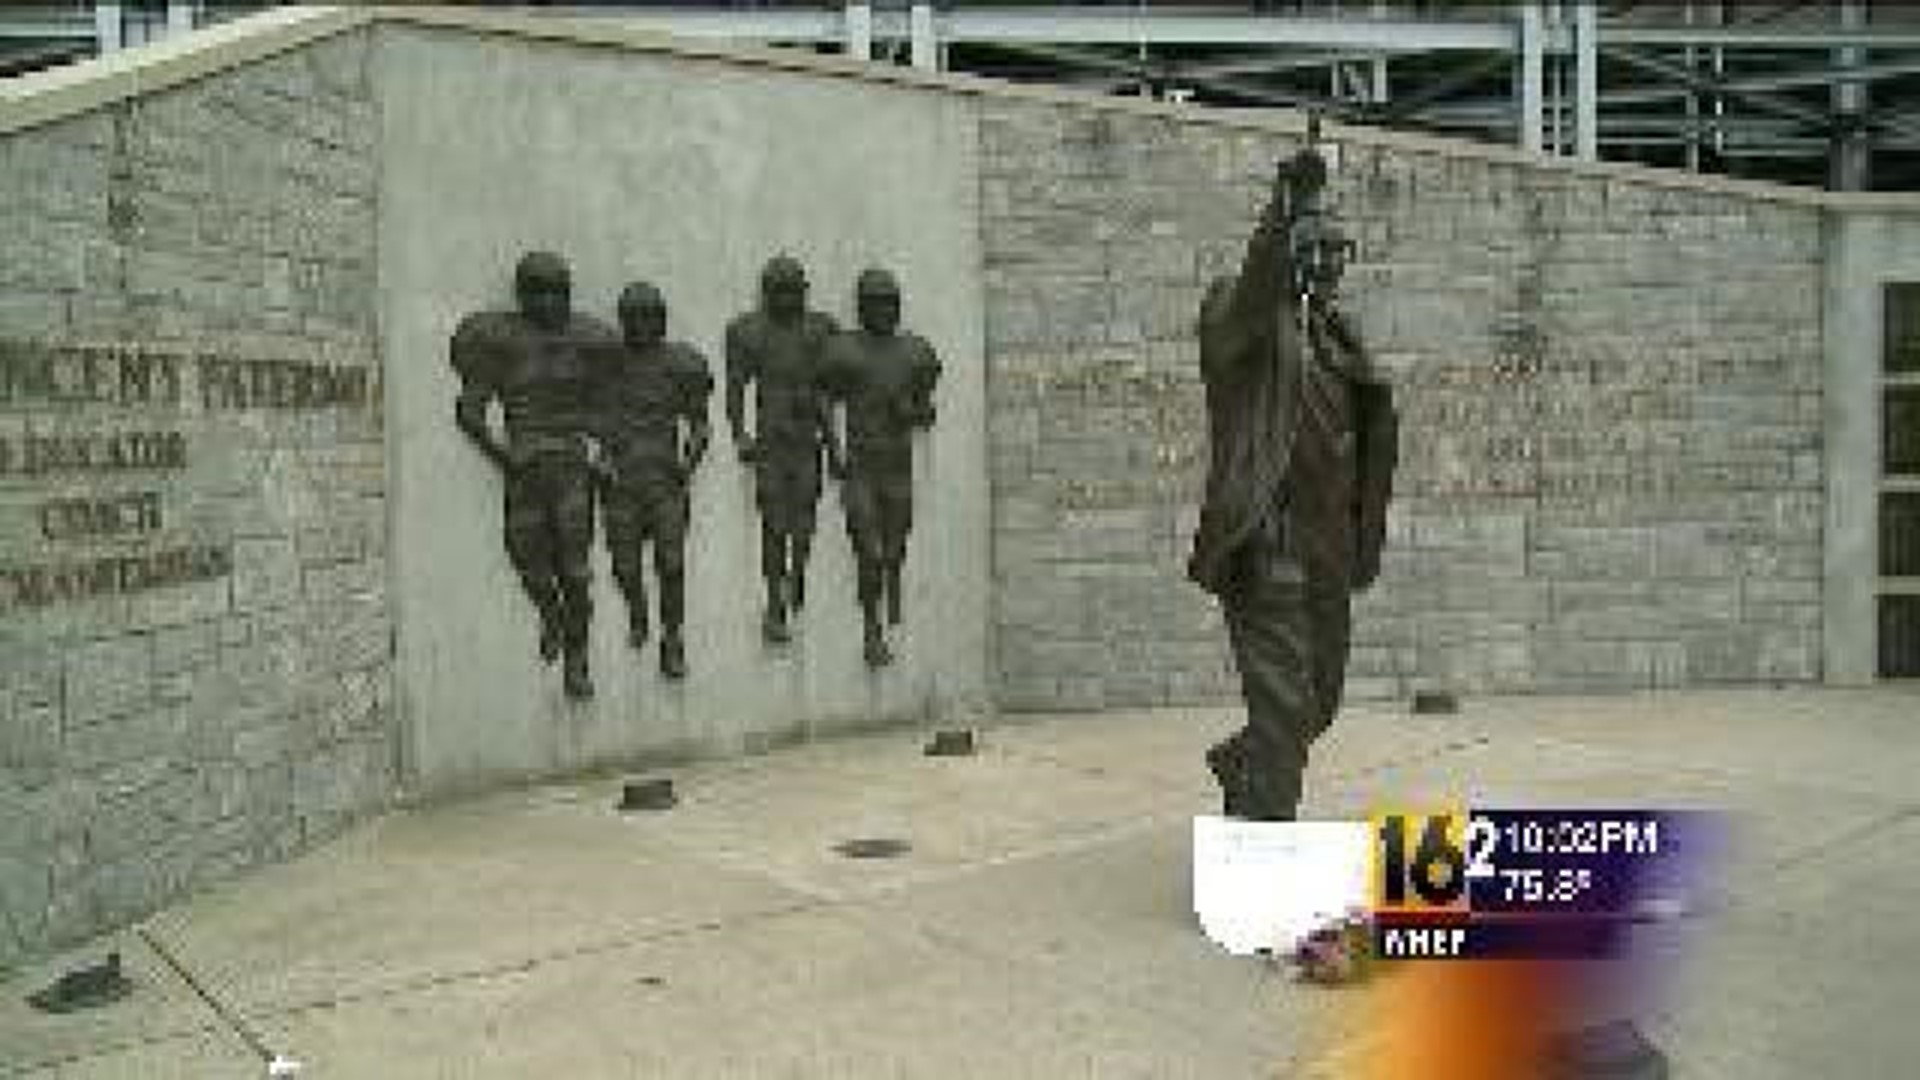 Fans Flock to Joe-Pa Statue for Possible Last Pictures